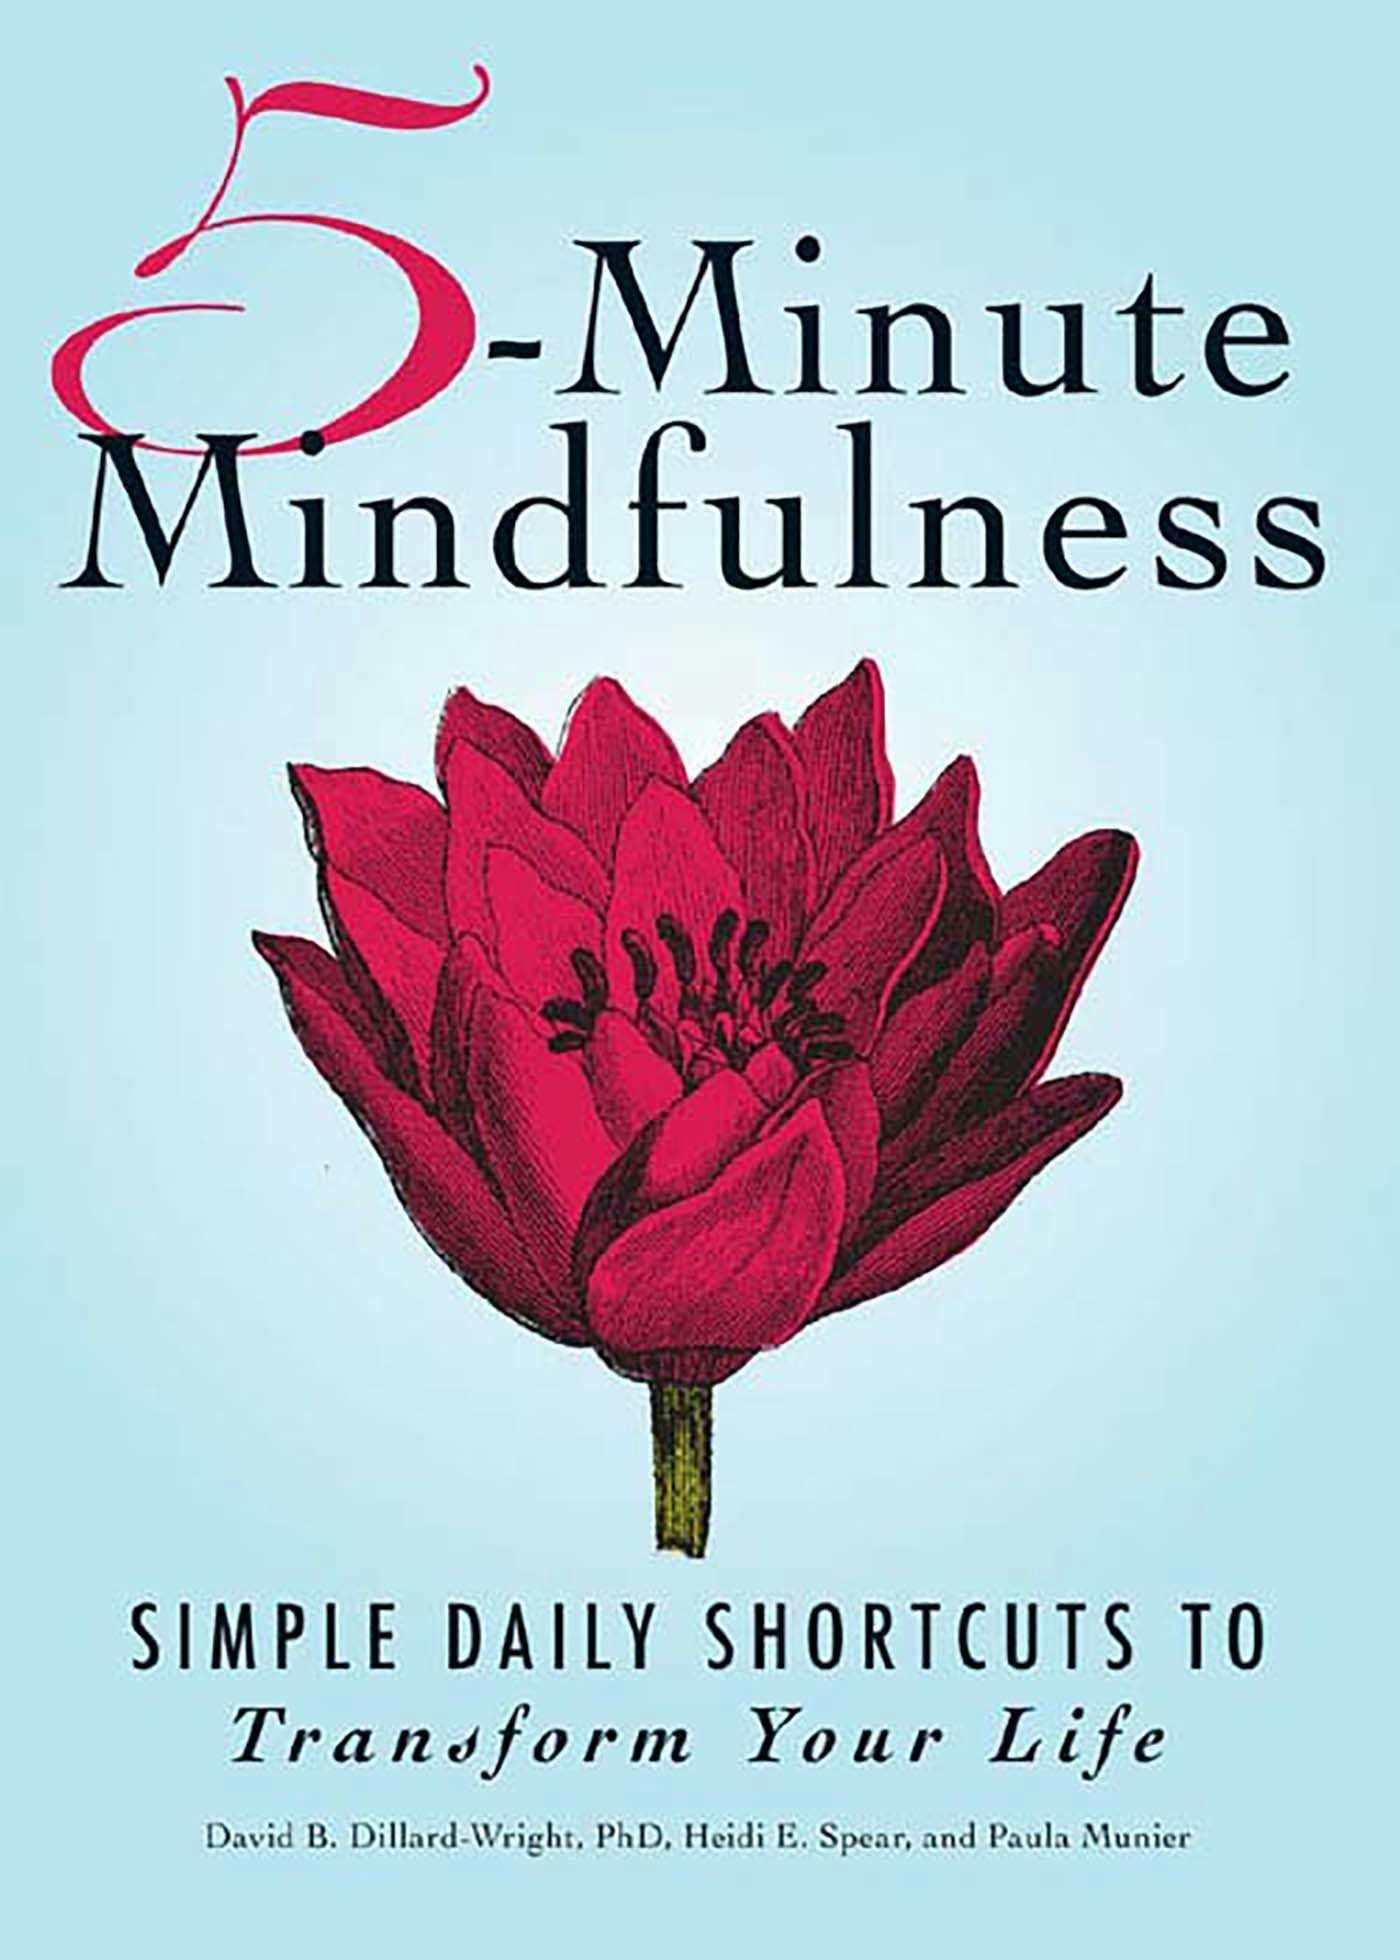 5-Minute Mindfulness: Simple Daily Shortcuts to Transform Your Life - undefined